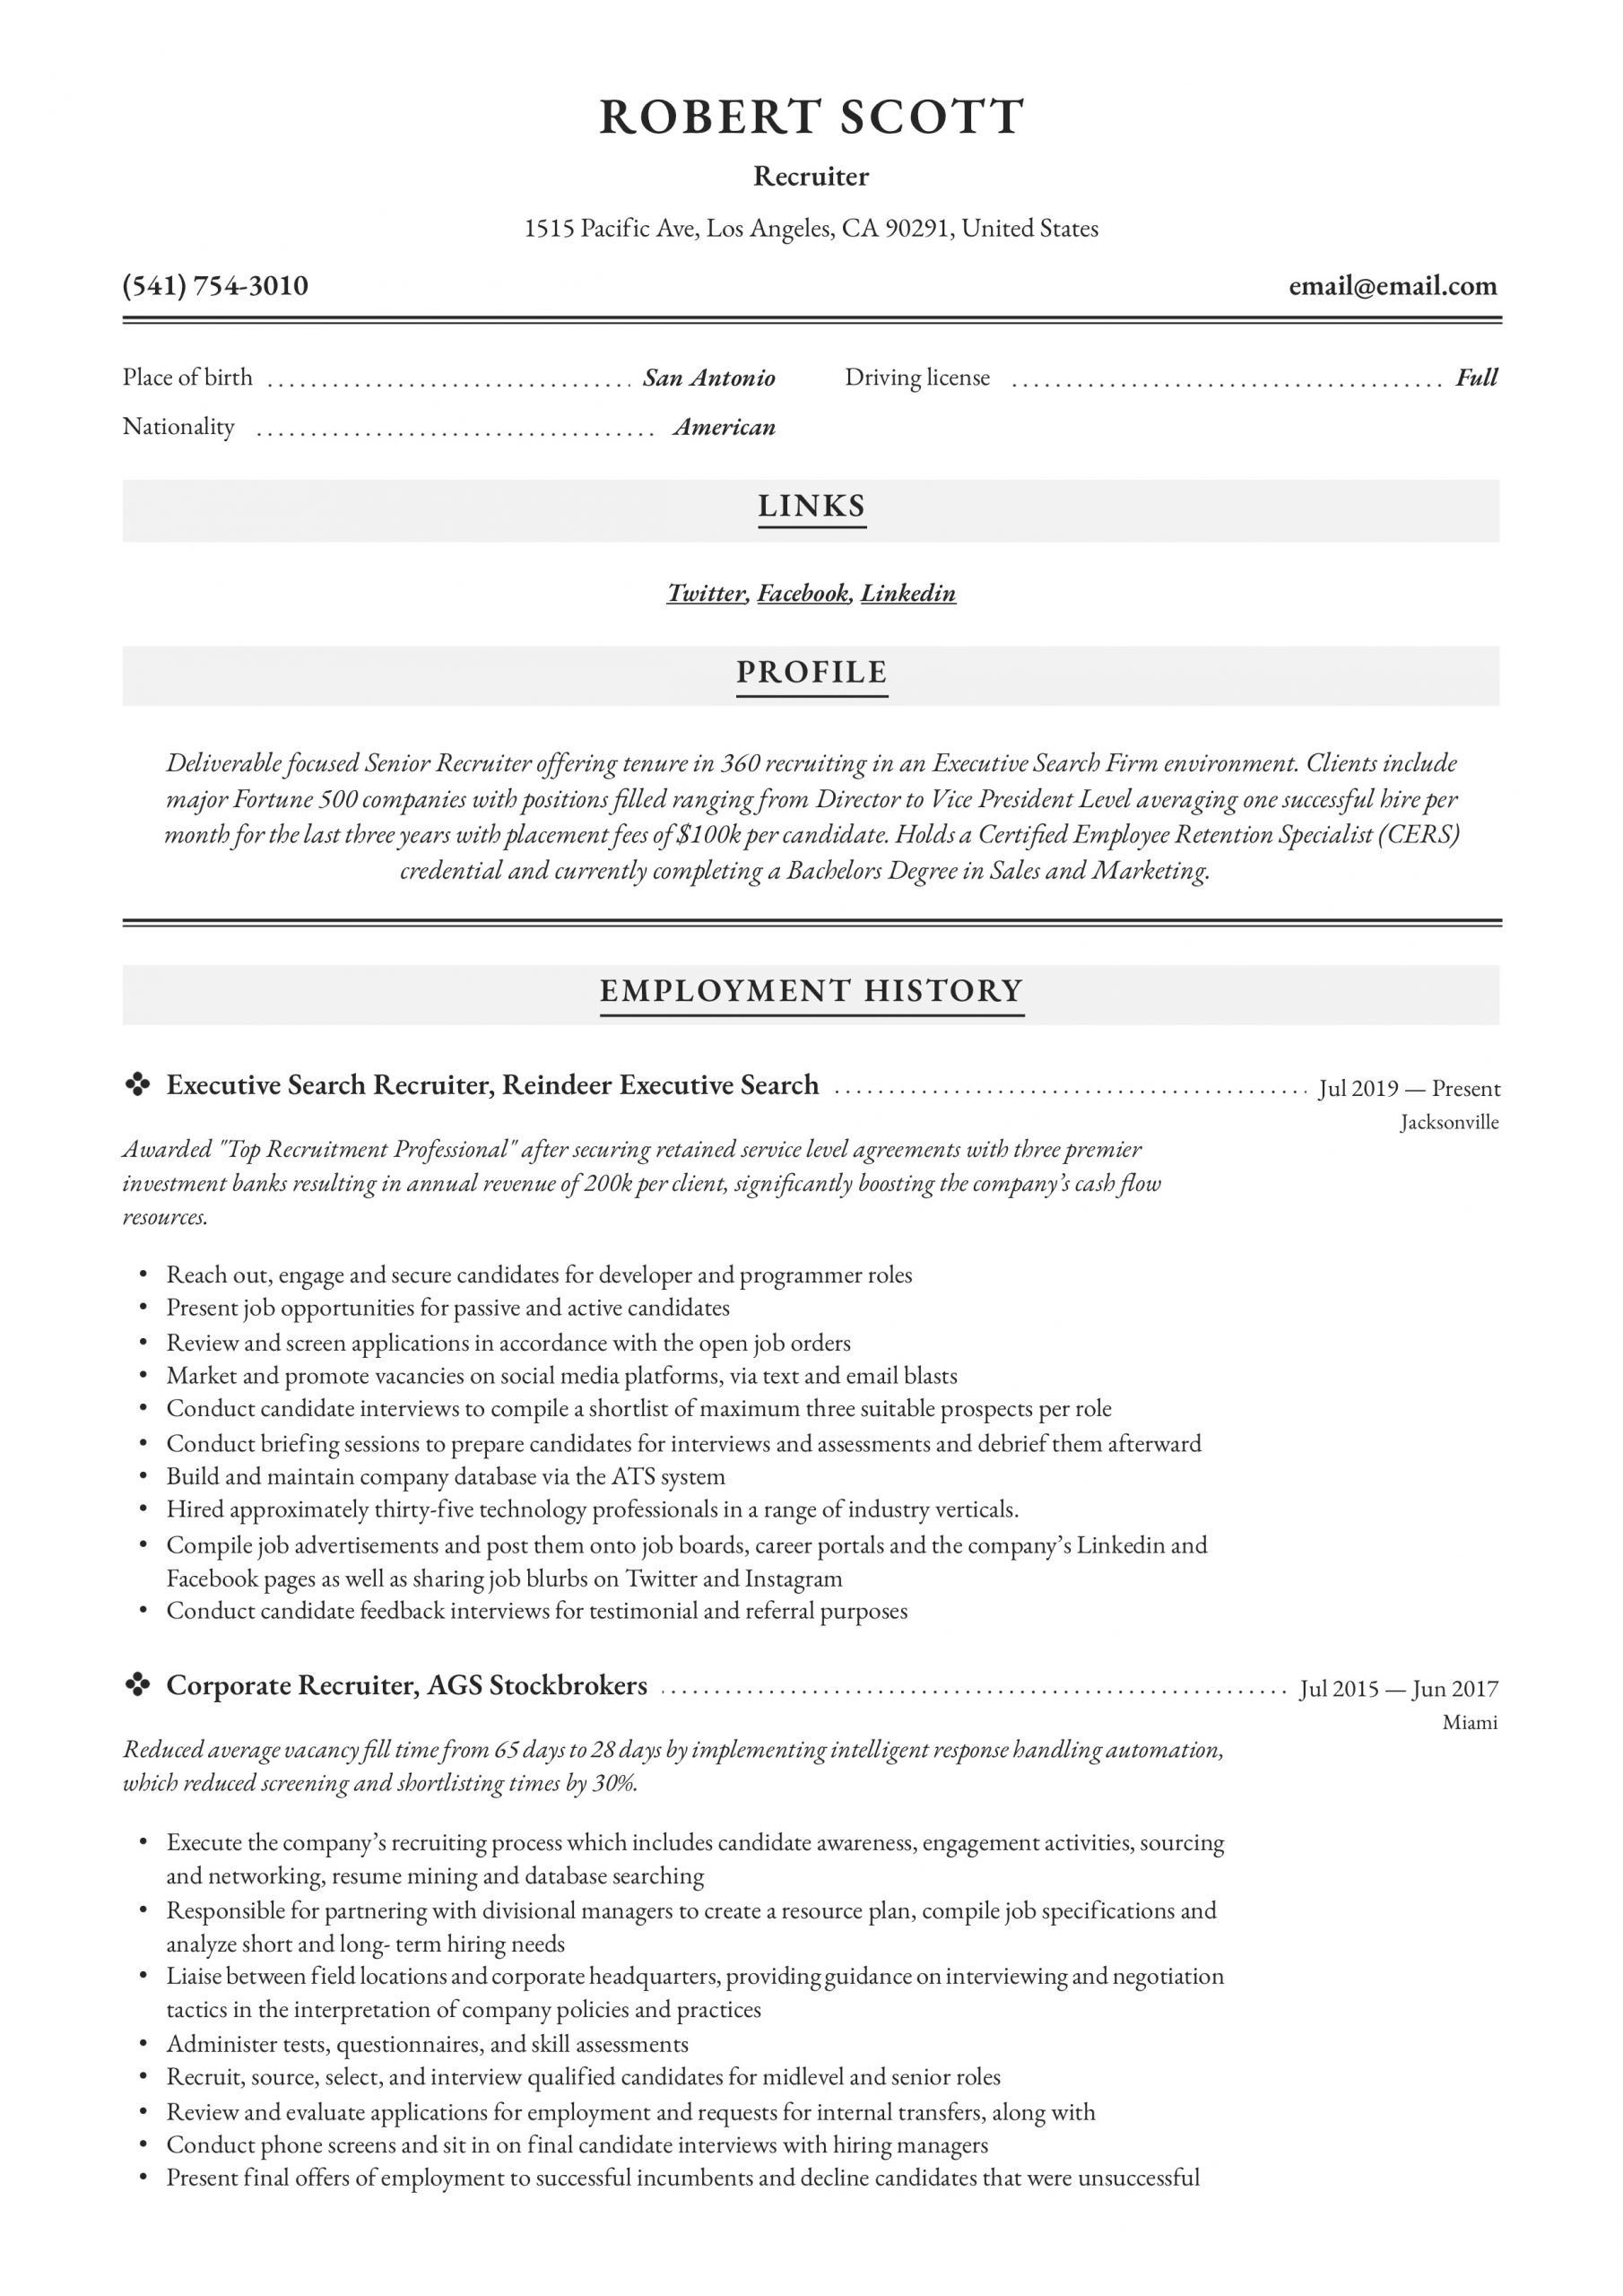 Recruiter Resume Writing Guide 12 Resume Examples 2020 within proportions 2480 X 3507